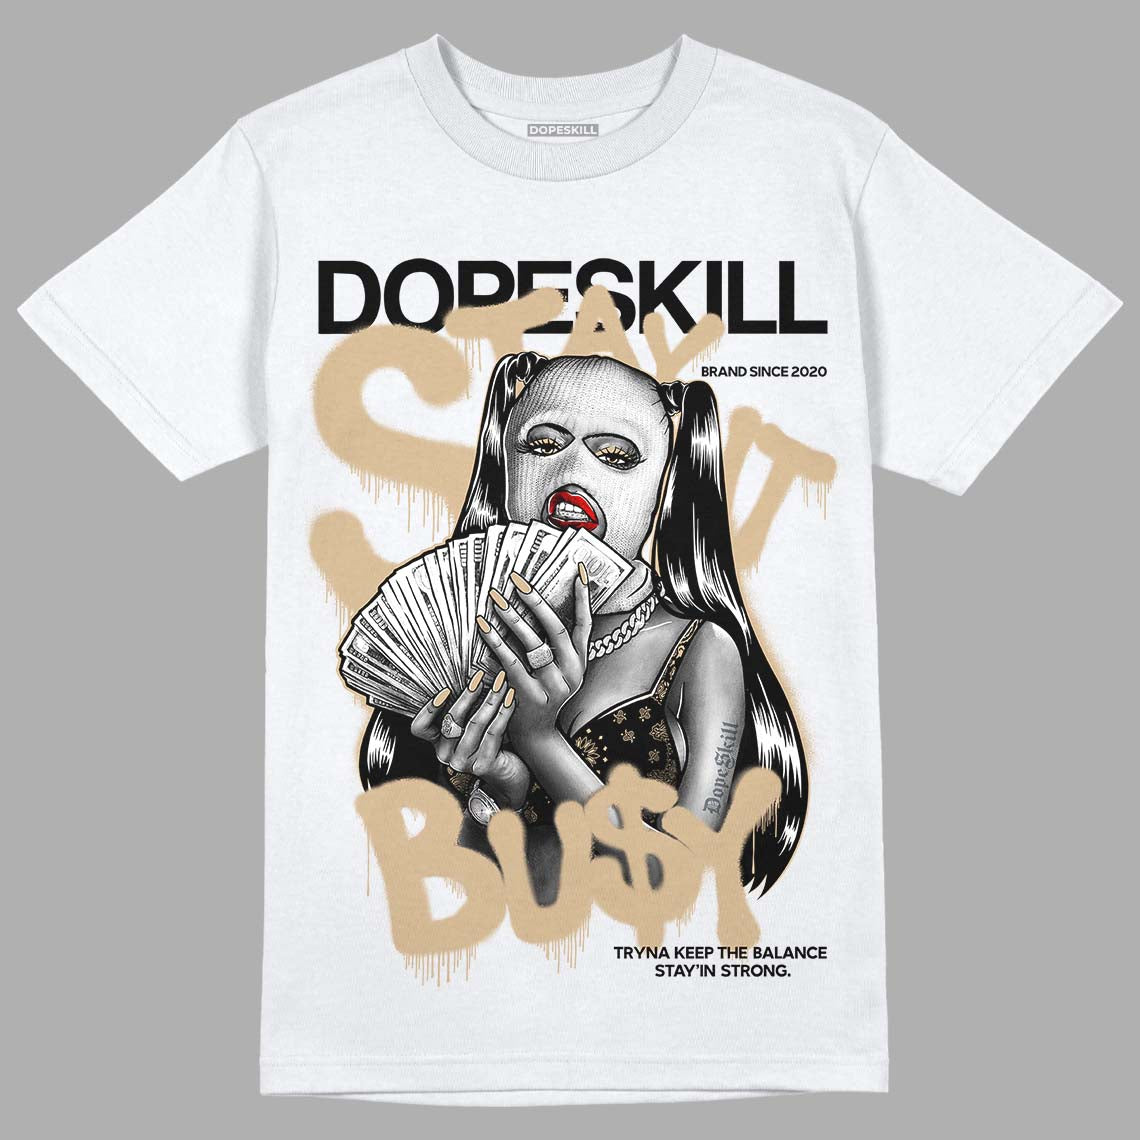 TAN Sneakers DopeSkill T-Shirt Stay It Busy Graphic Streetwear - White